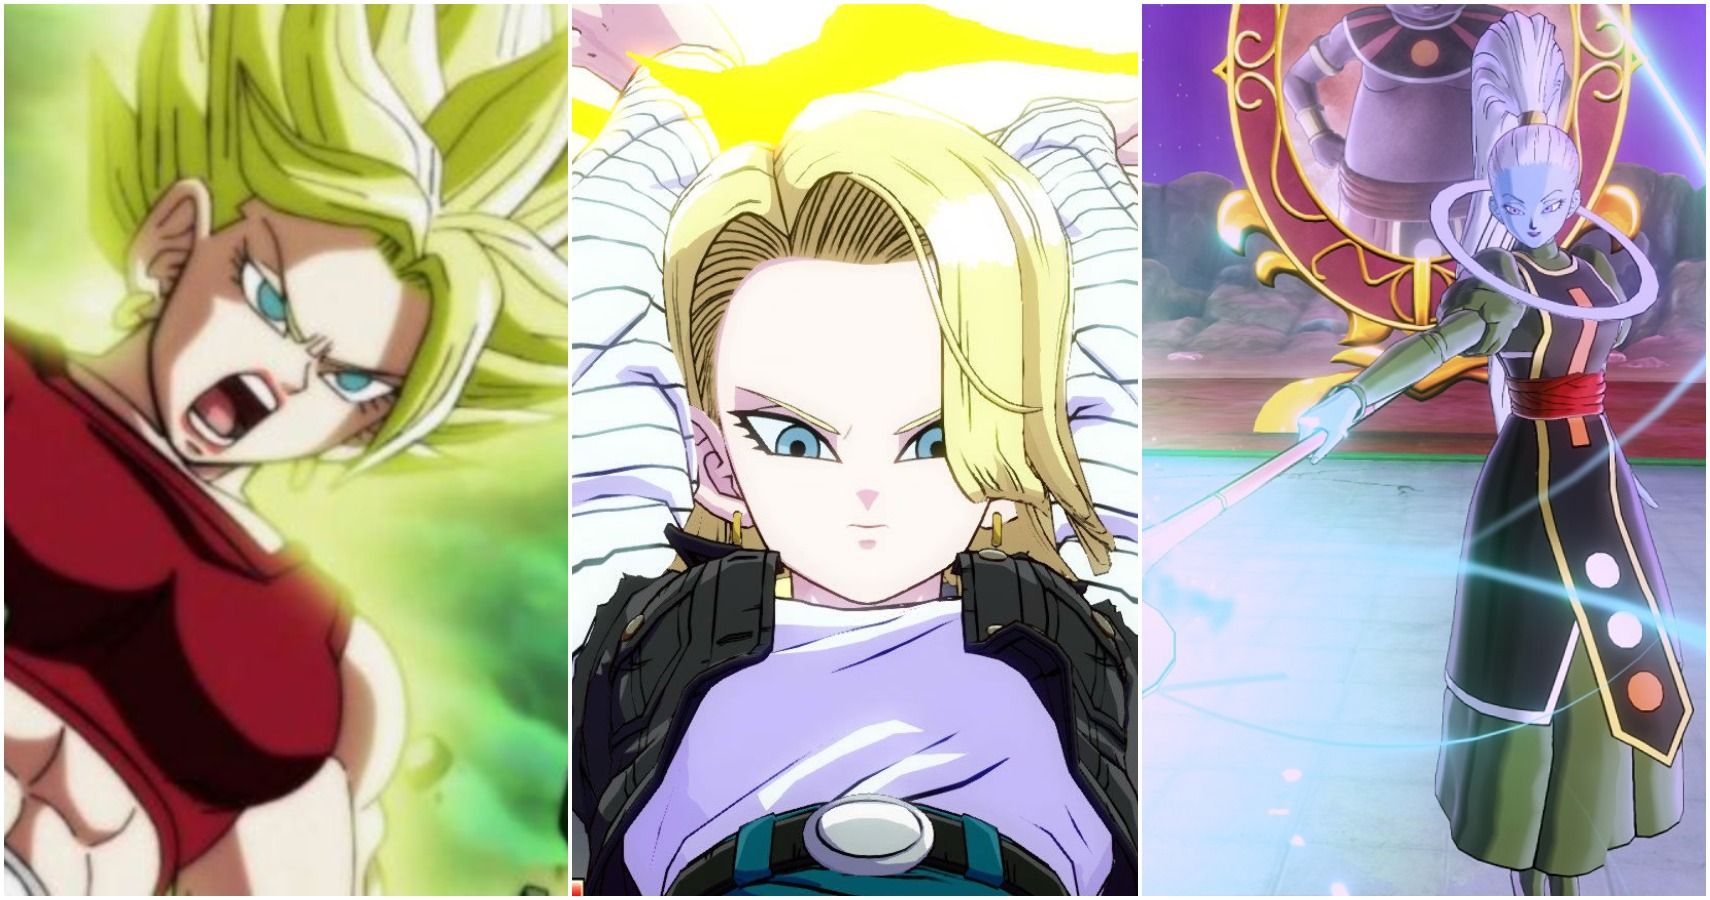 Characters appearing in Dragon Ball Z Movie 2: The World's Strongest Anime